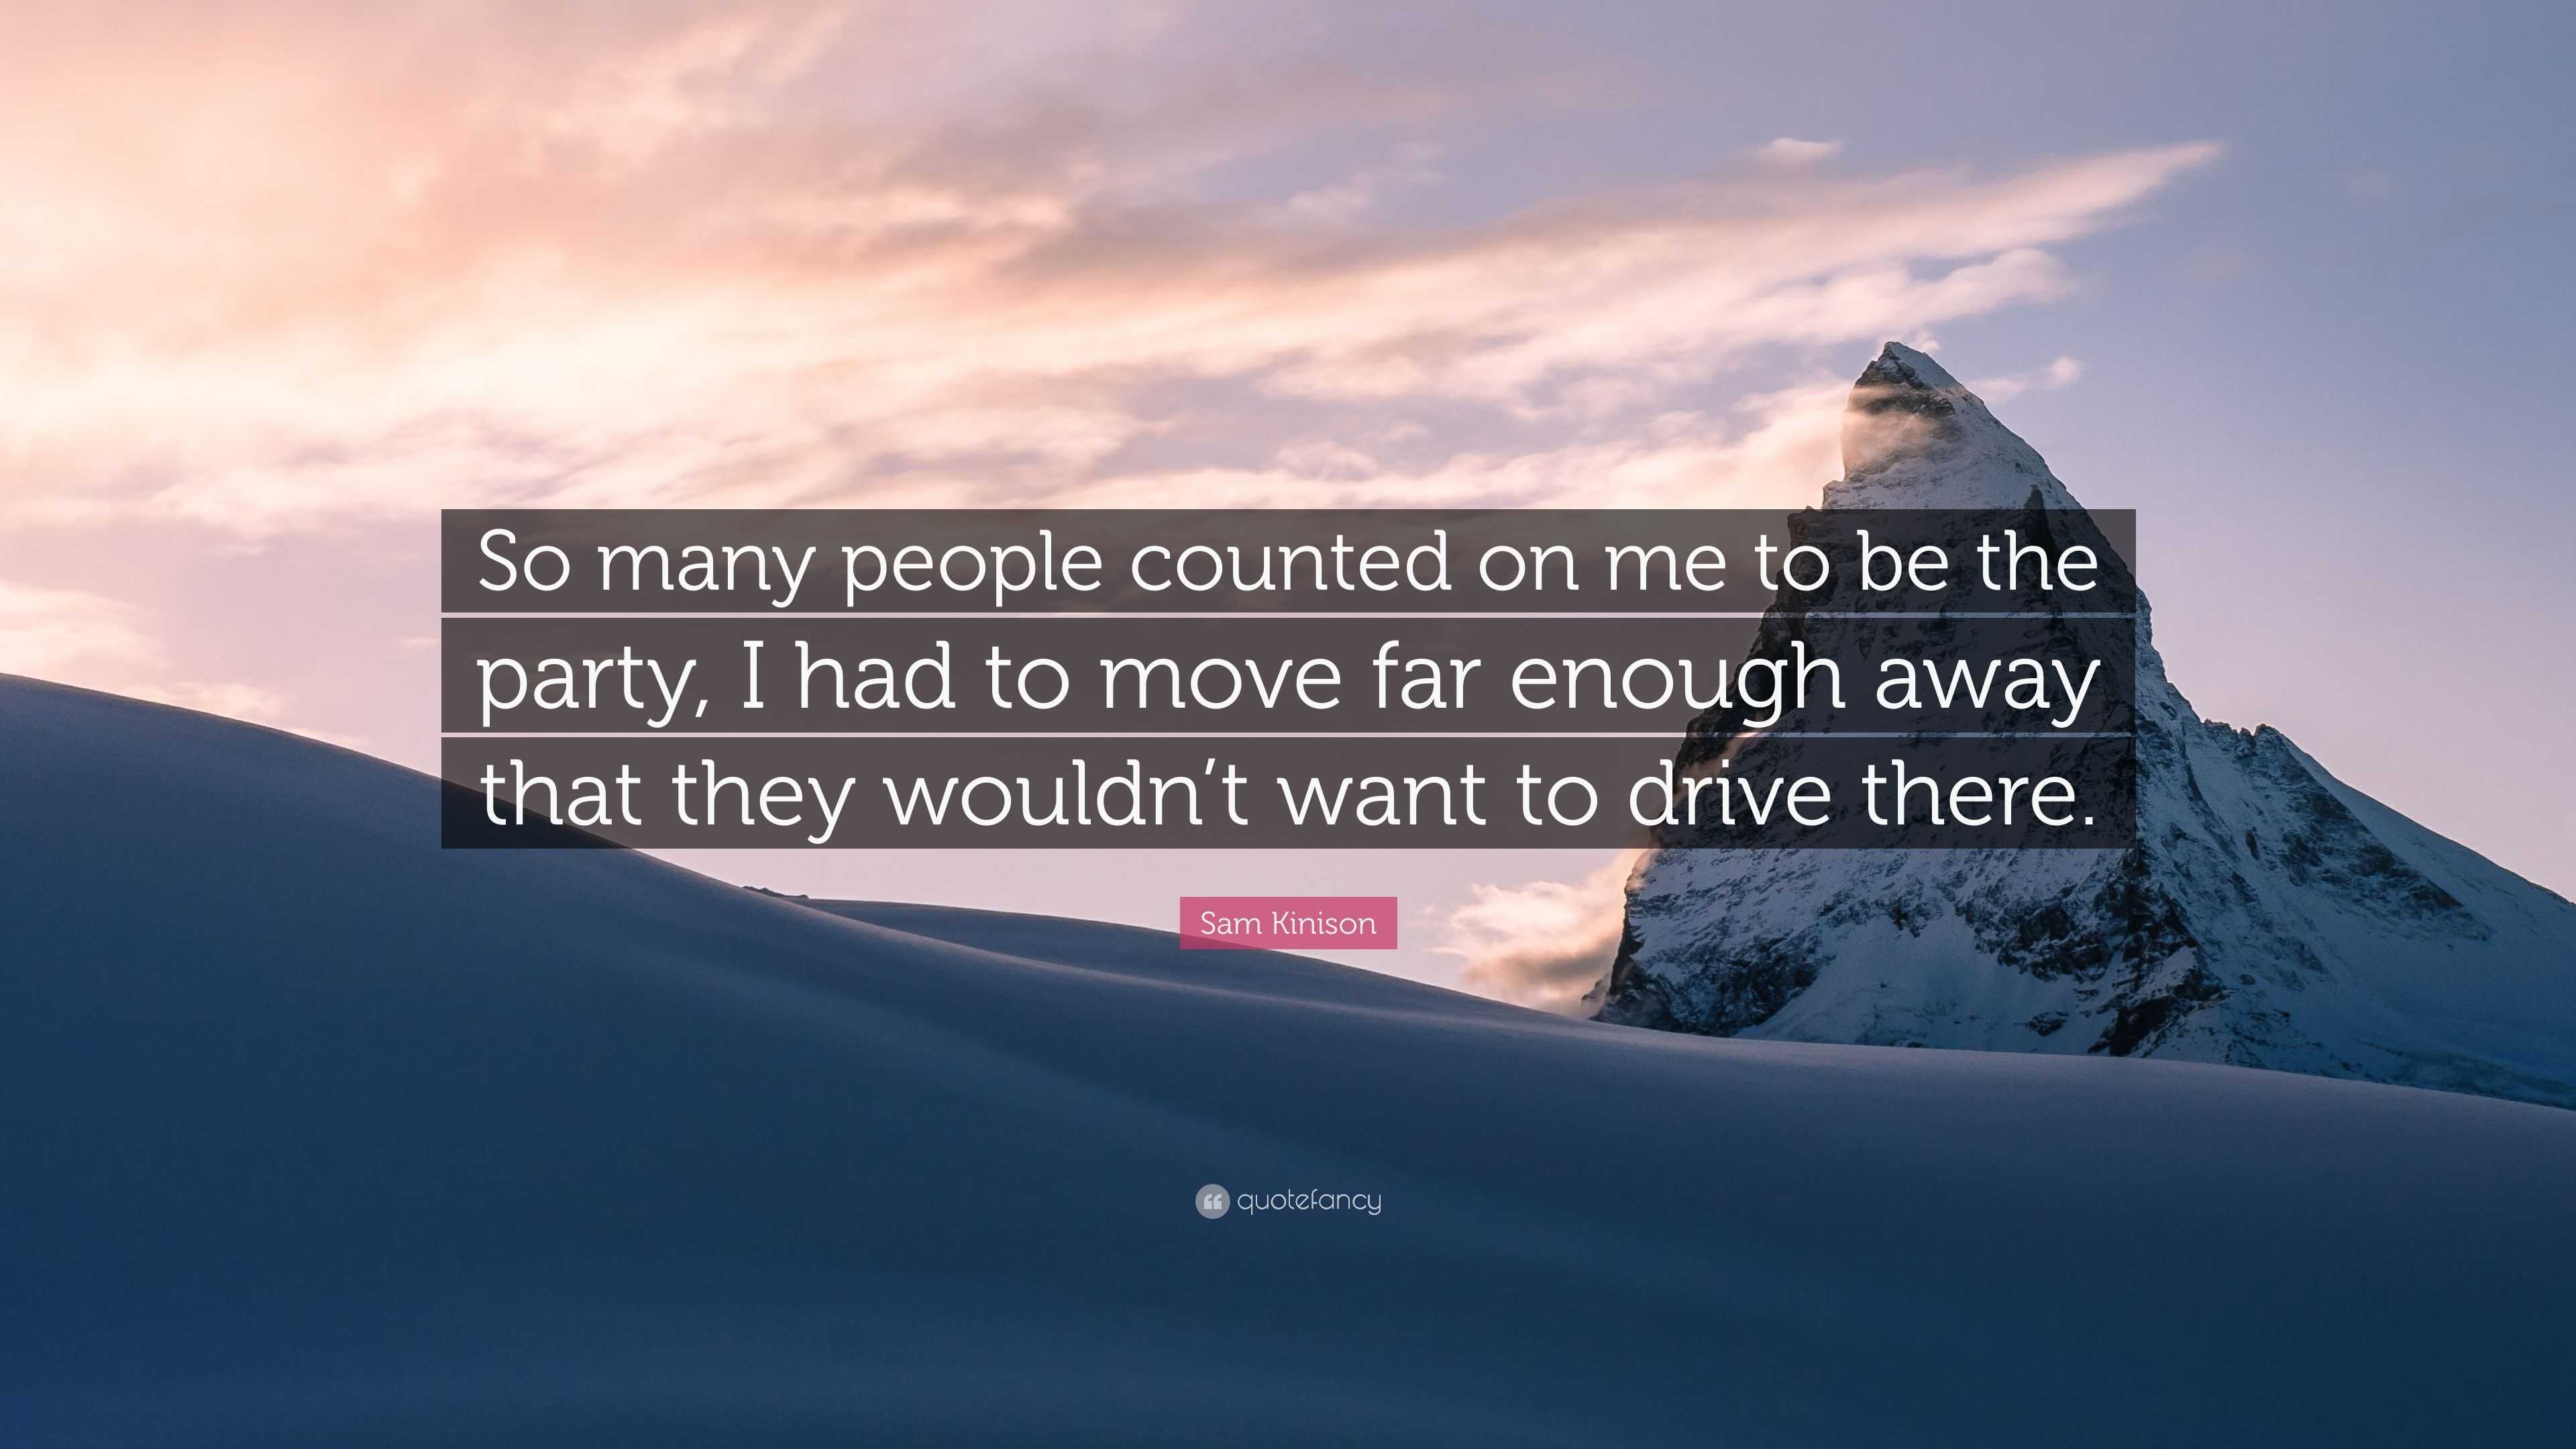 Sam Kinison Quote "So many people counted on me to be the.